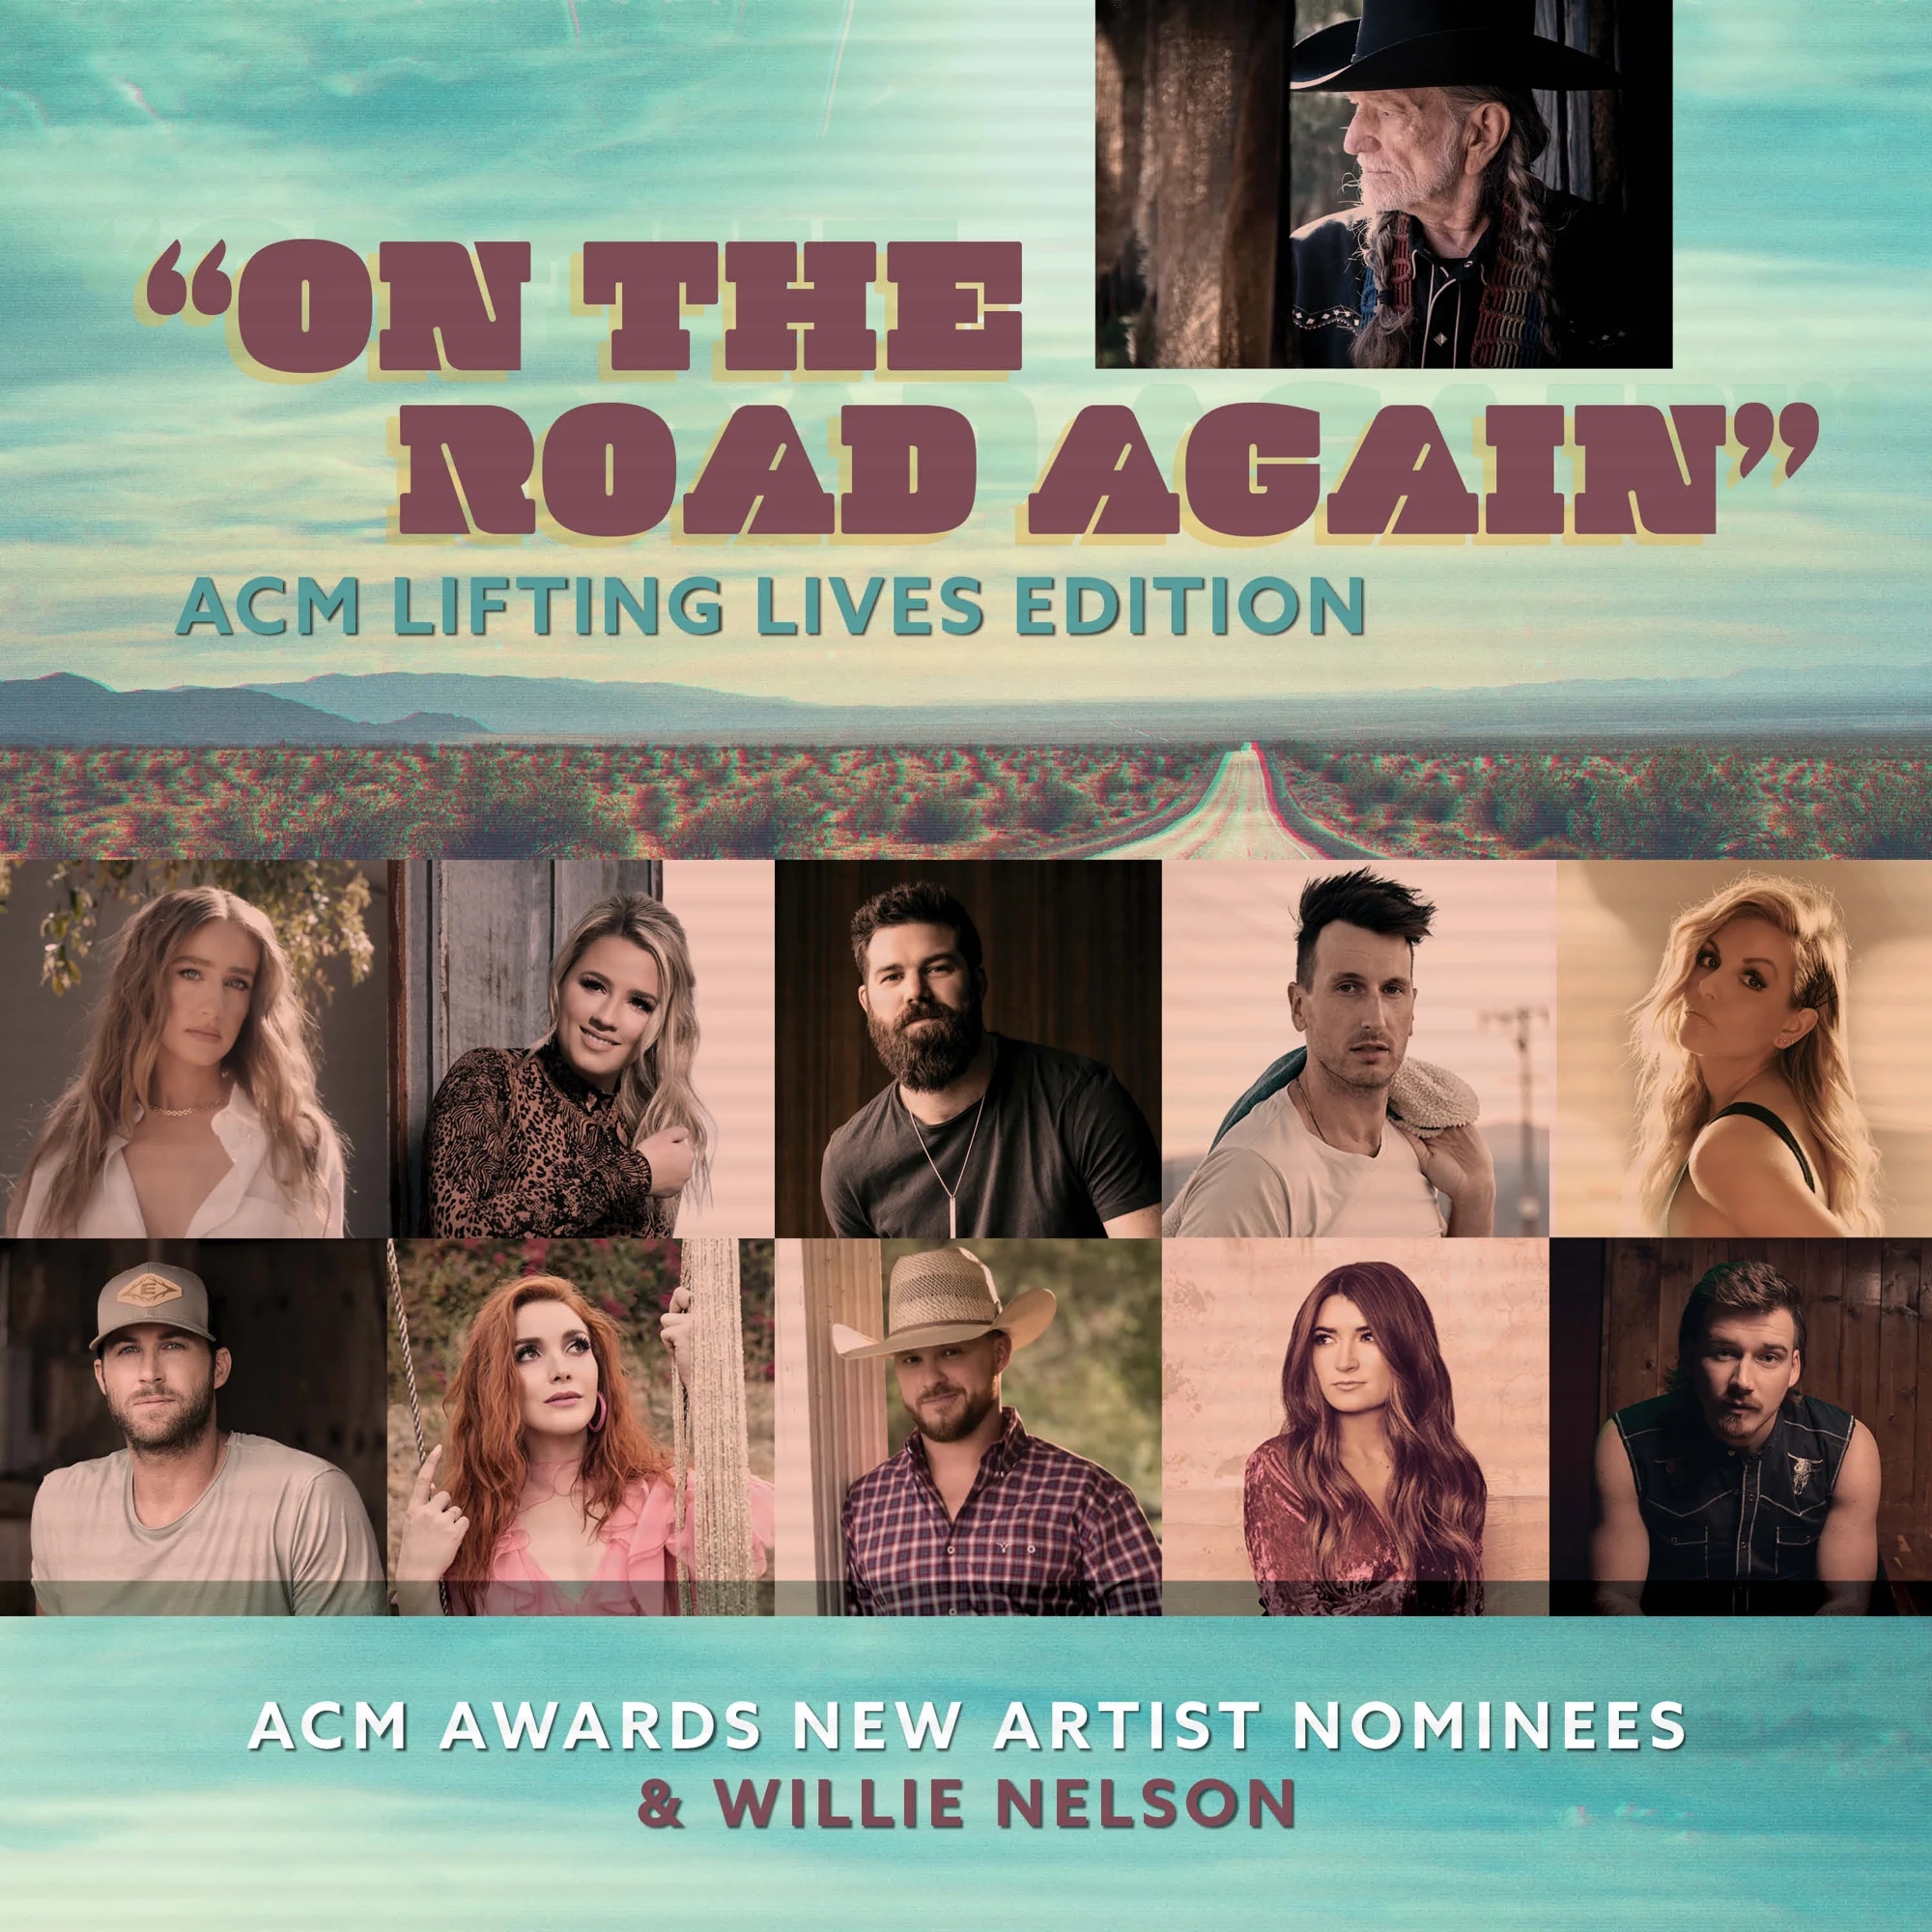 On The Road Again (ACM Lifting Lives Edition) - Willie Nelson (feat. Ingrid Andress, Gabby Barrett, Jordan Davis, Russell Dickerson, Lindsay Ell, Riley Green, Caylee Hammack, Cody Johnson, Tenille Townes, and Morgan Wallen)
Released: August 13, 2020 
Label: Warner Music Nashville
